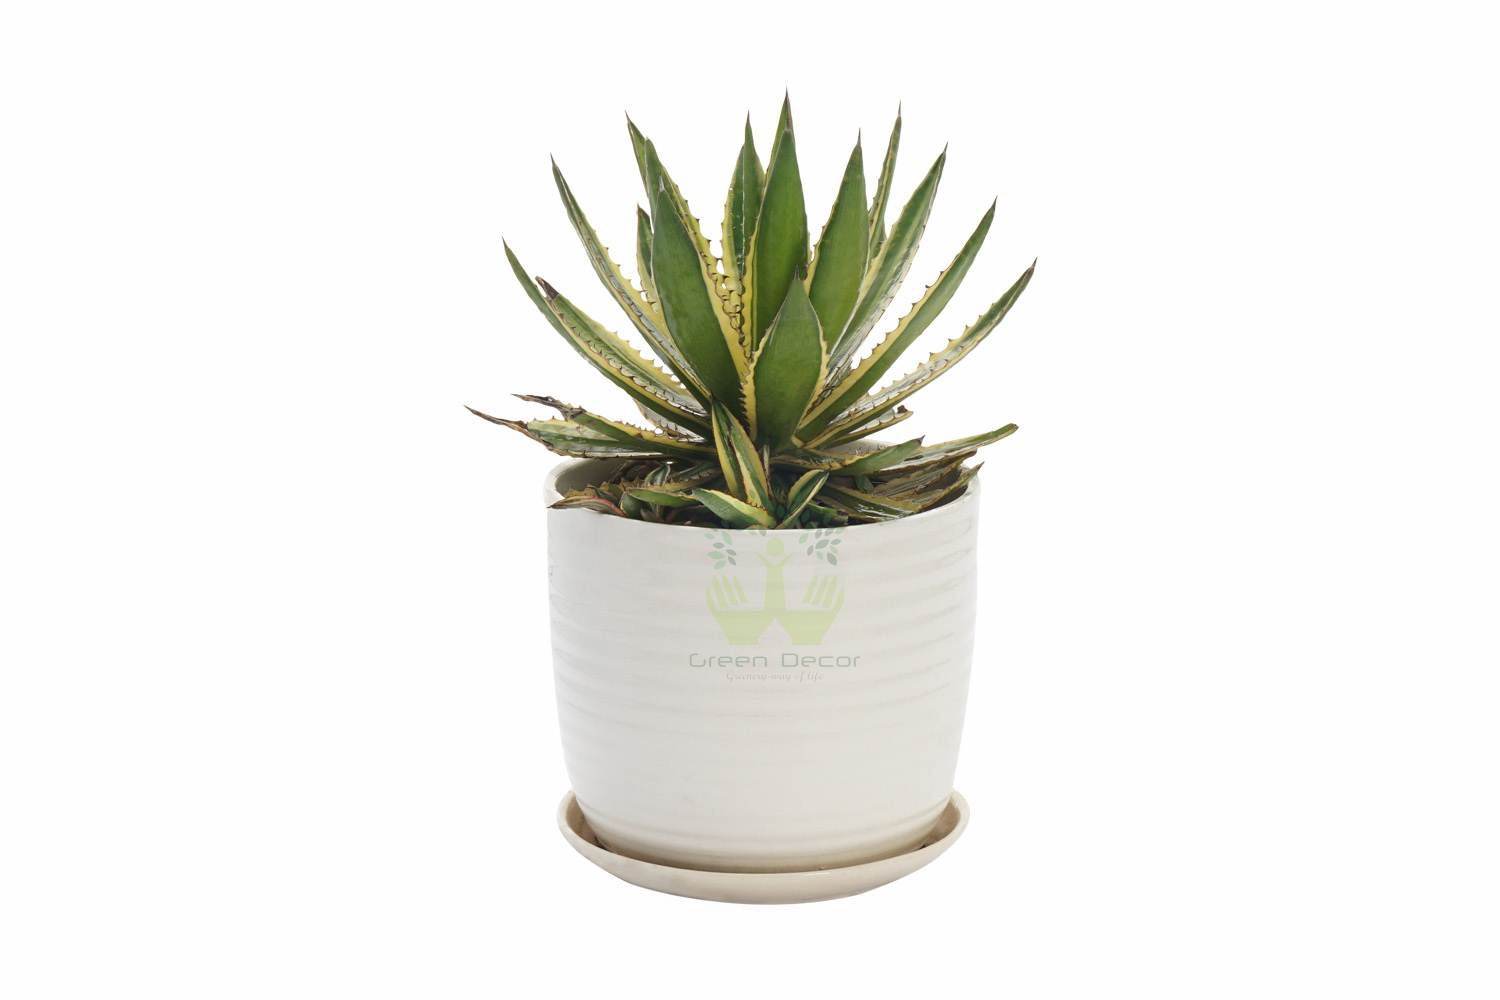 Buy Agave Lophantha Plants Front View , White Pots and seeds in Delhi NCR by the best online nursery shop Greendecor.